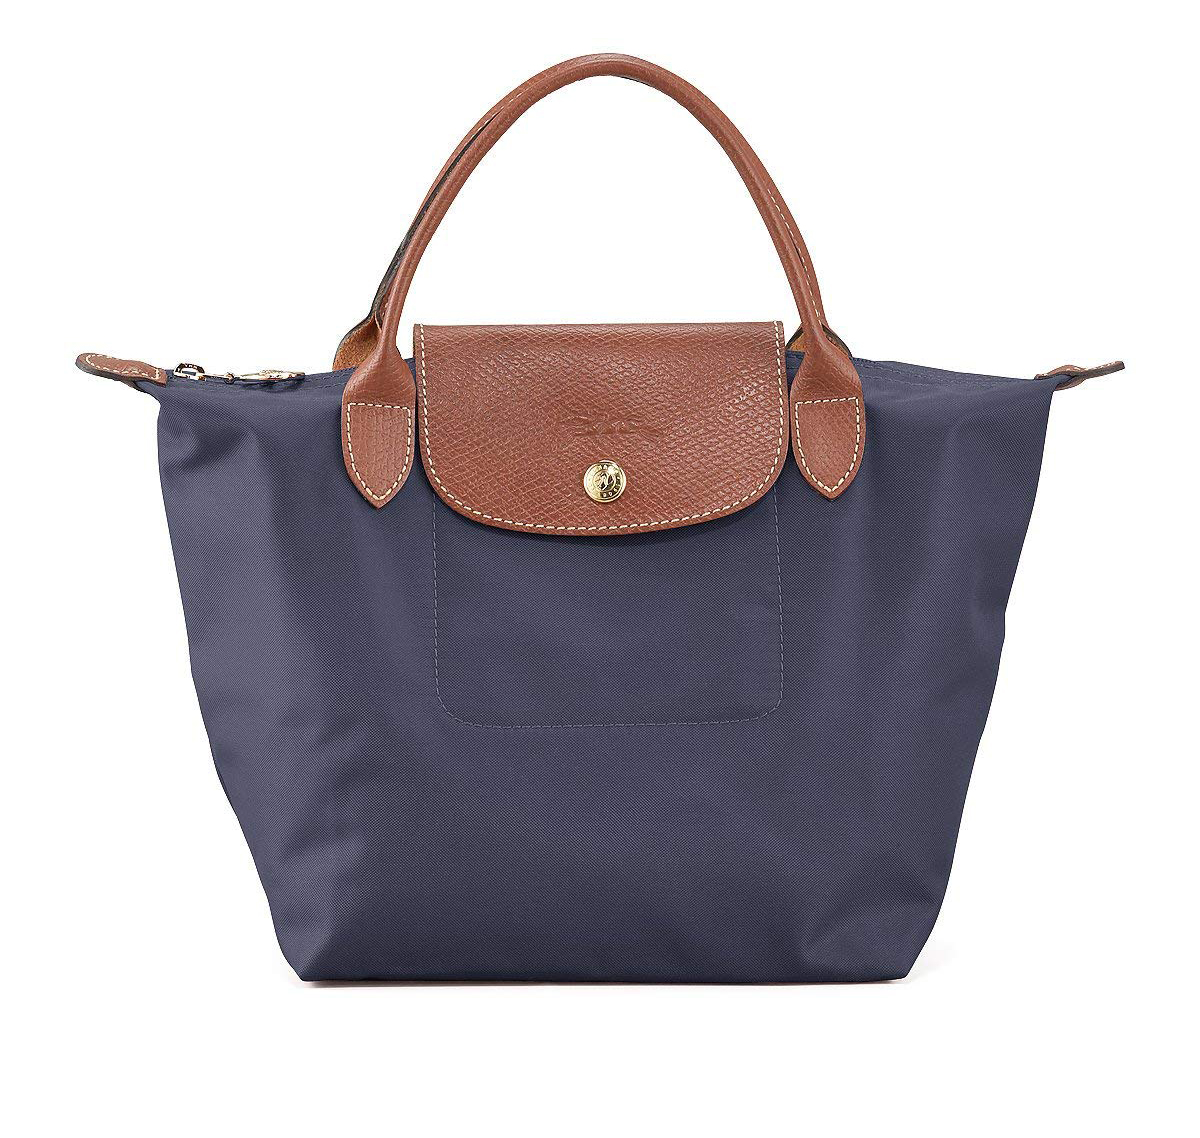 Longchamp Bags Are on Sale Right Now at Saks Off Fifth